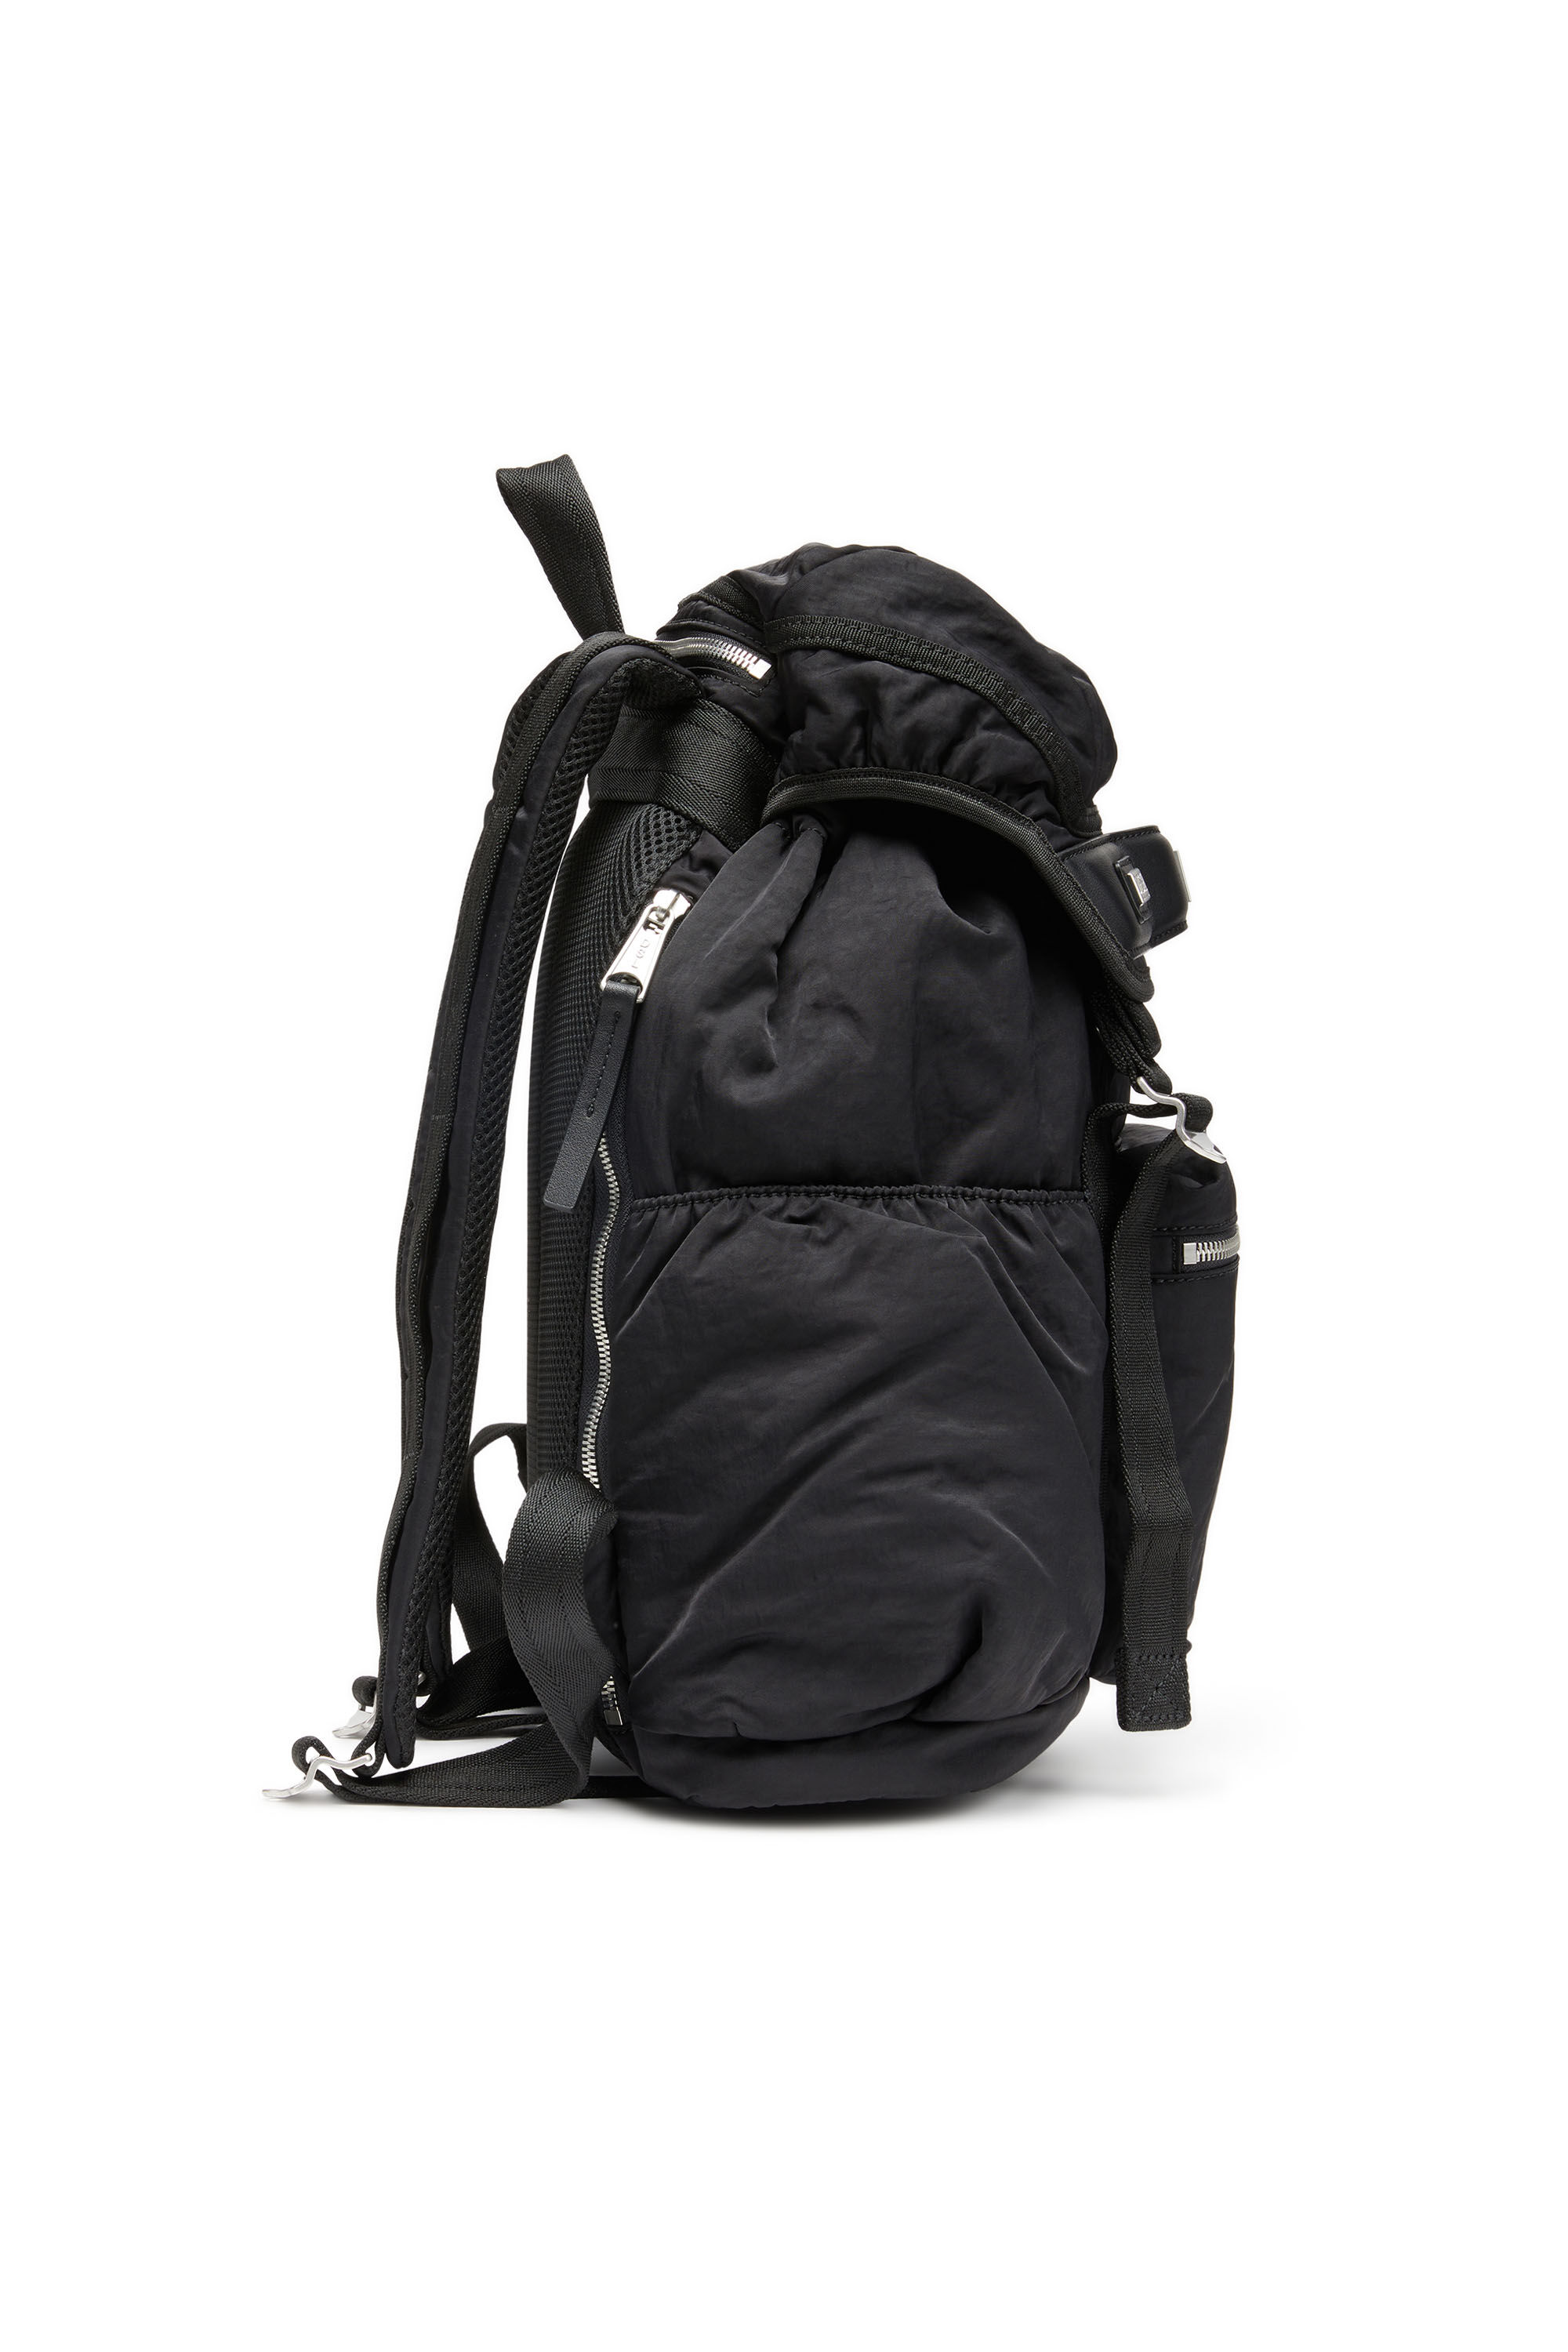 LOGOS BACKPACK L Logos L-Large backpack in recycled nylon 